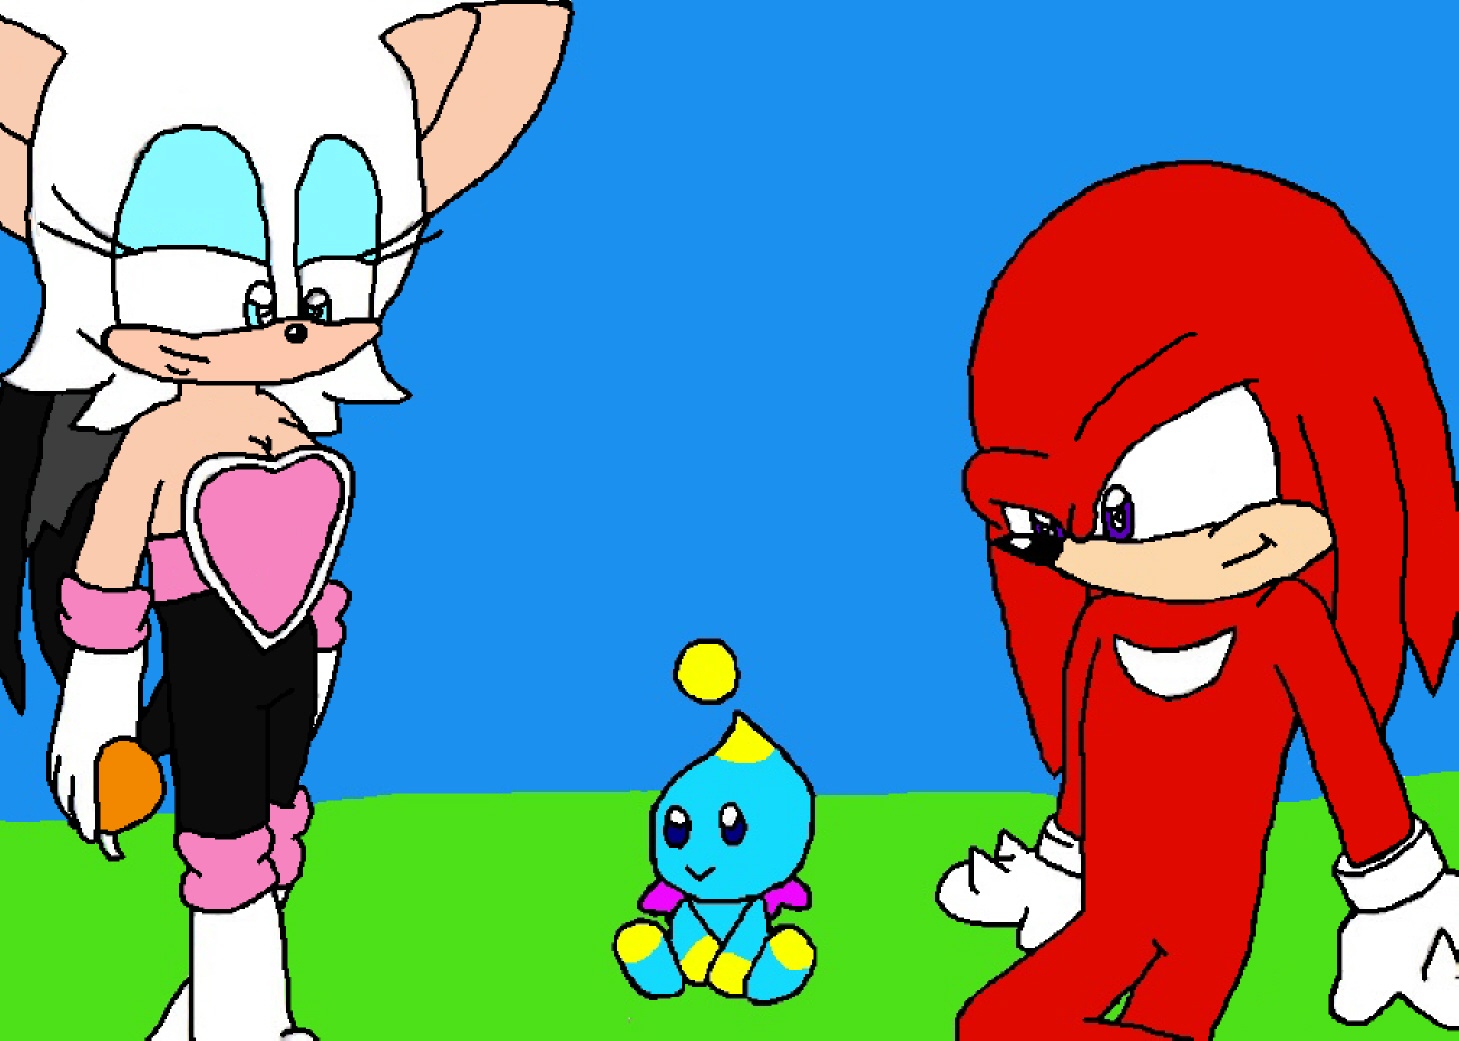 Chao Garden (Request From starthehedgehog) by knux_and_rouge_fan